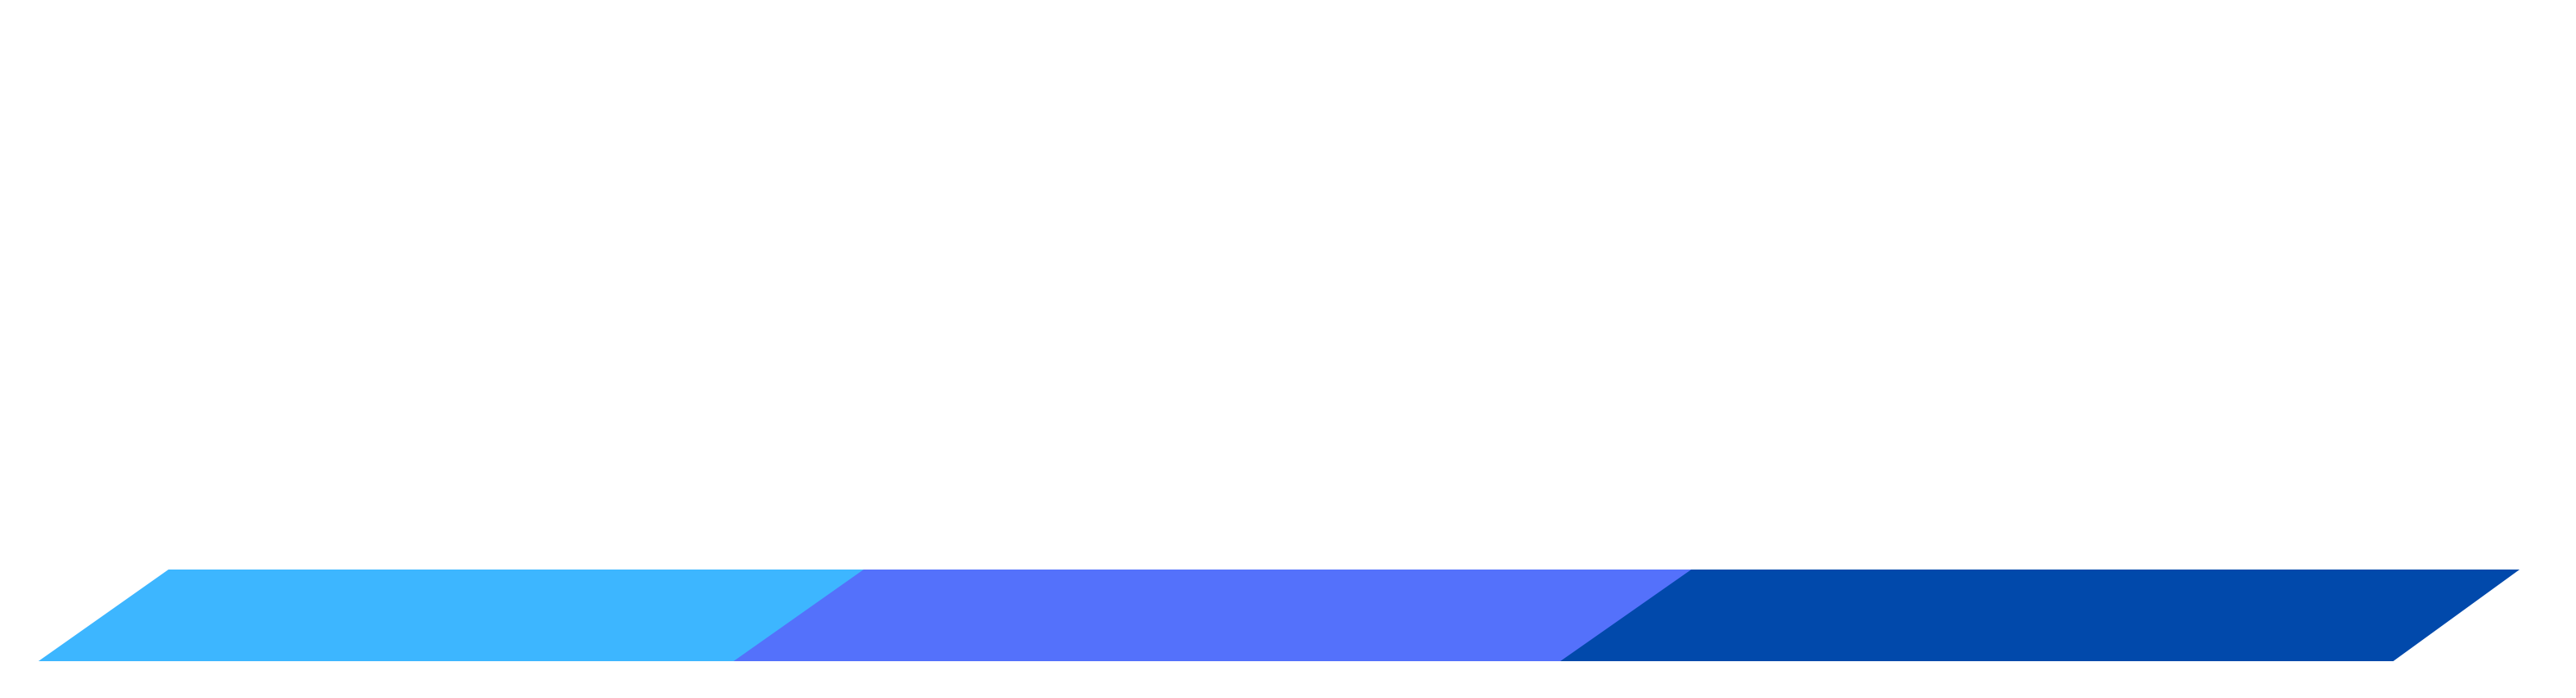 IEEE EPFL Student Branch is an association from .